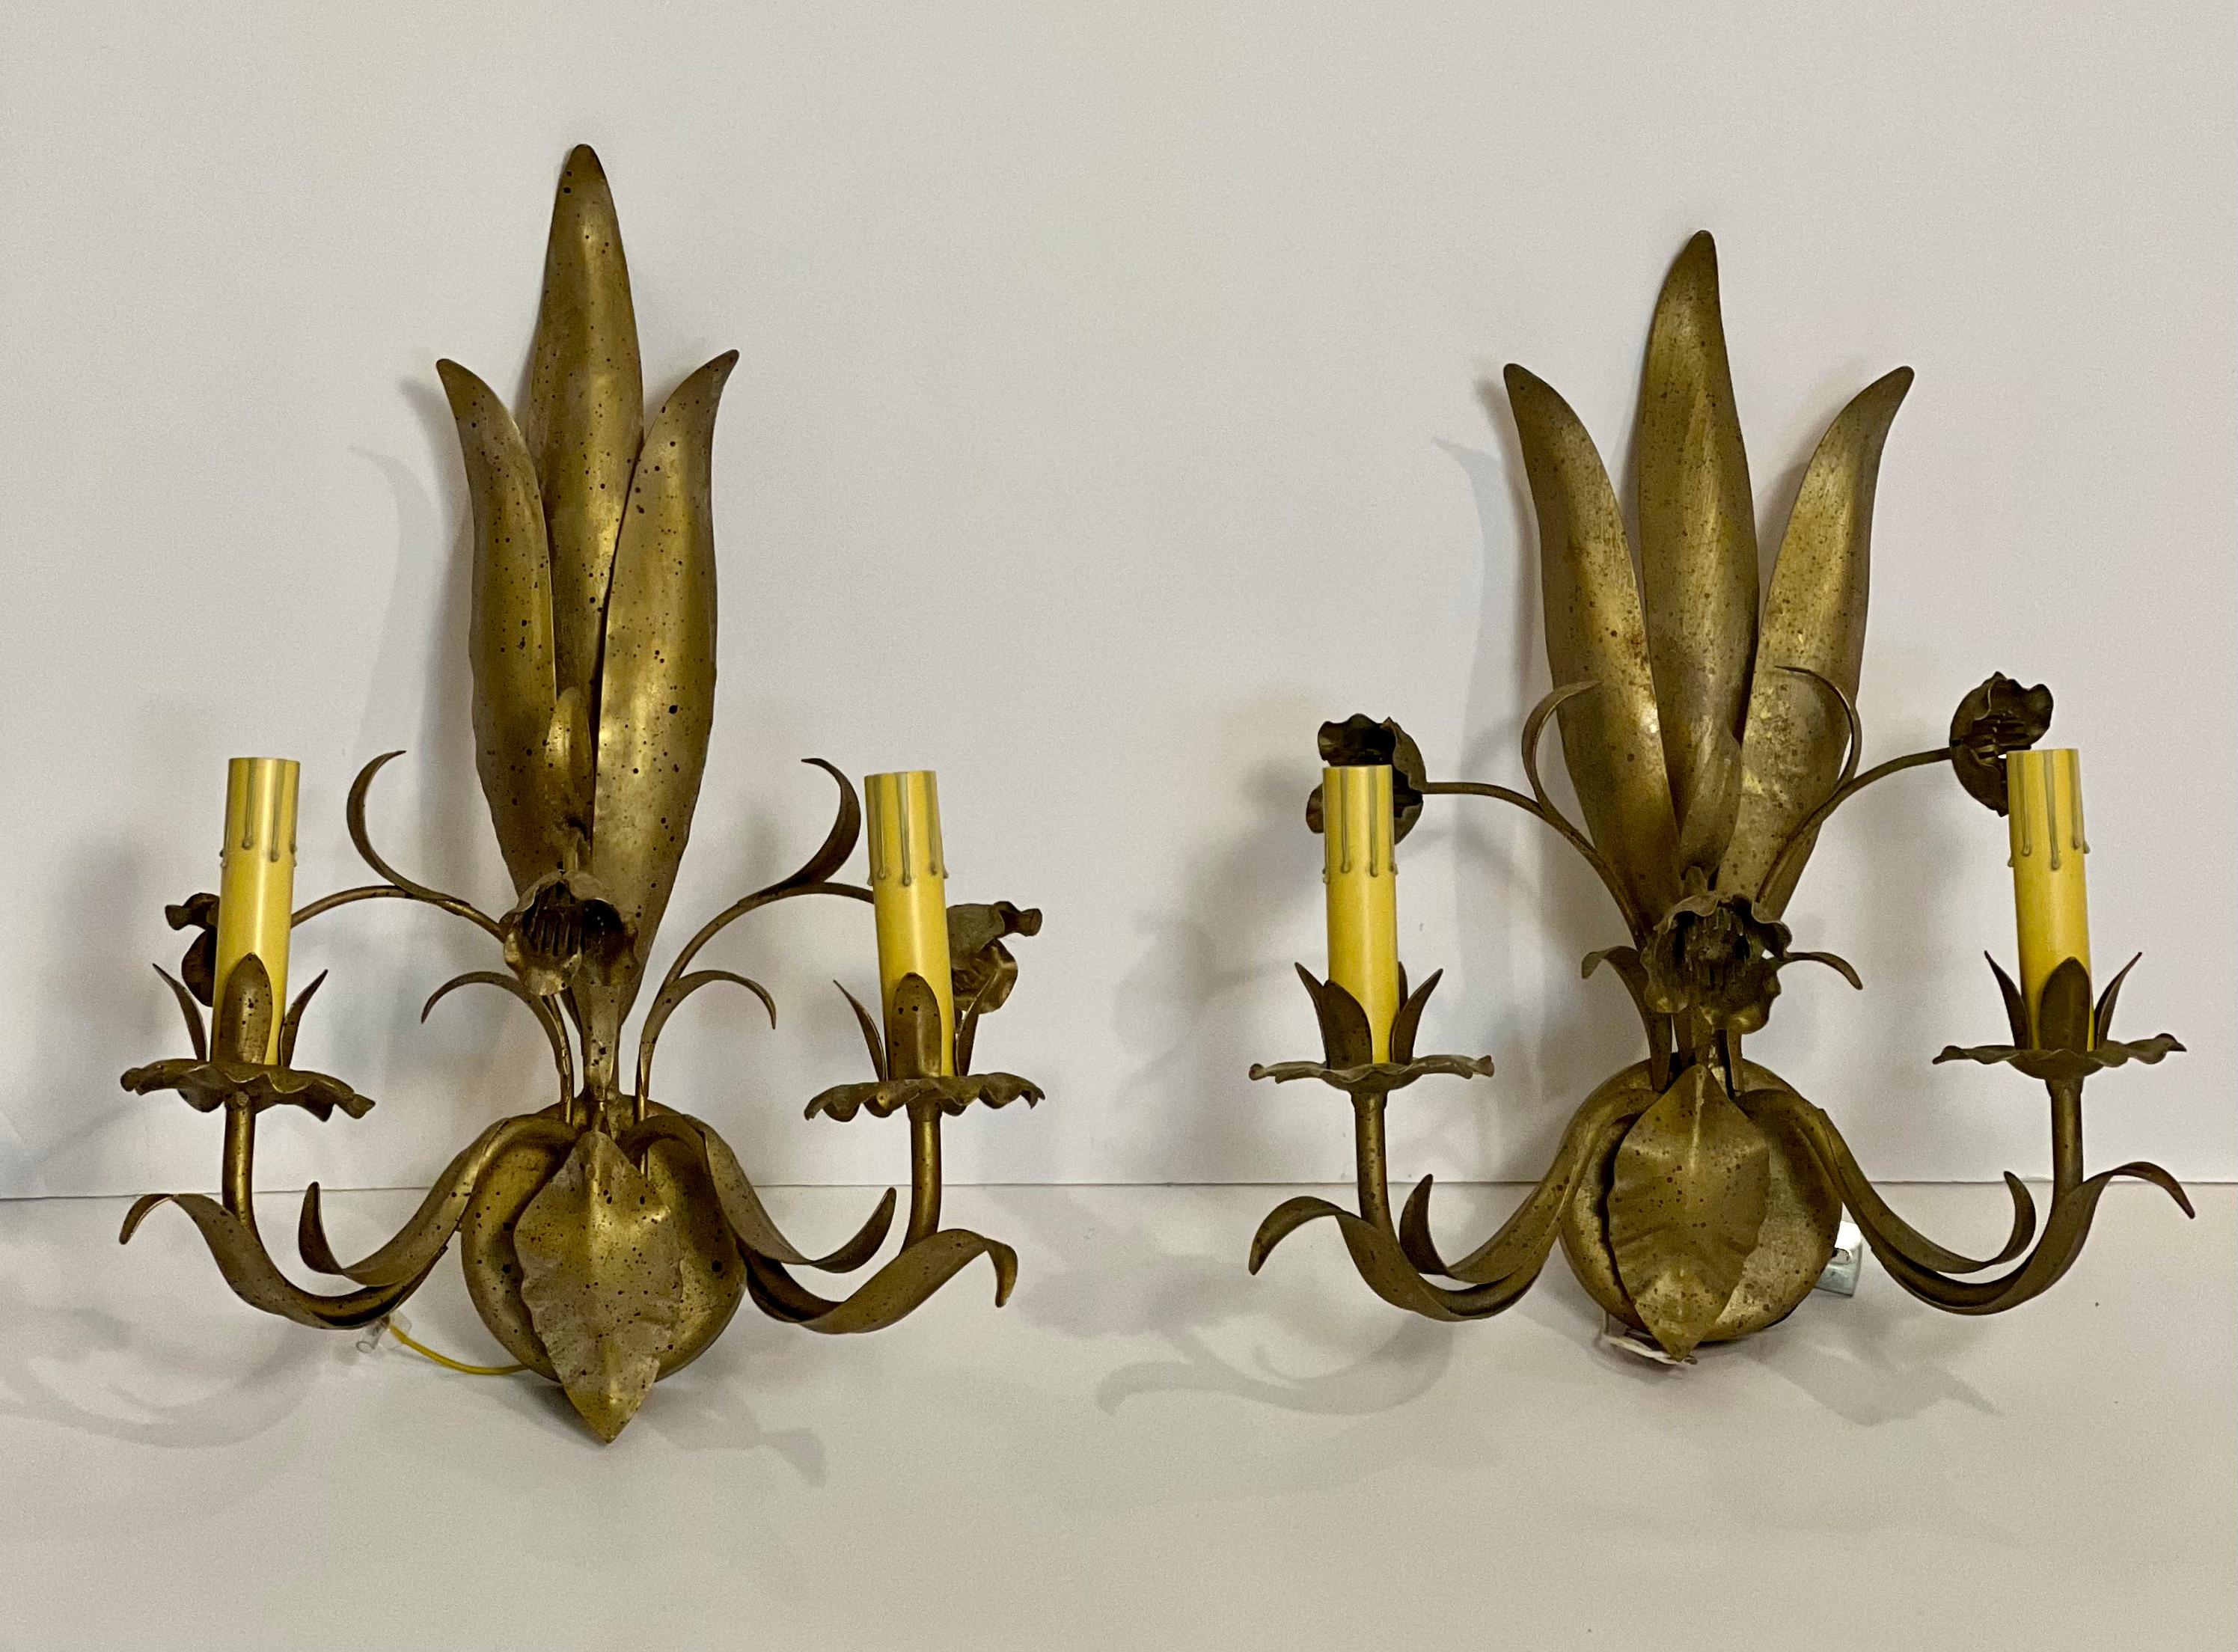 Elegant Italian sconces with beautiful free-form floral and leaf design. 

Unique pair features a matte gold with black speckled finish having a lightly aged look. Each sconce is a little different due to individual craftsmanship. In good condition